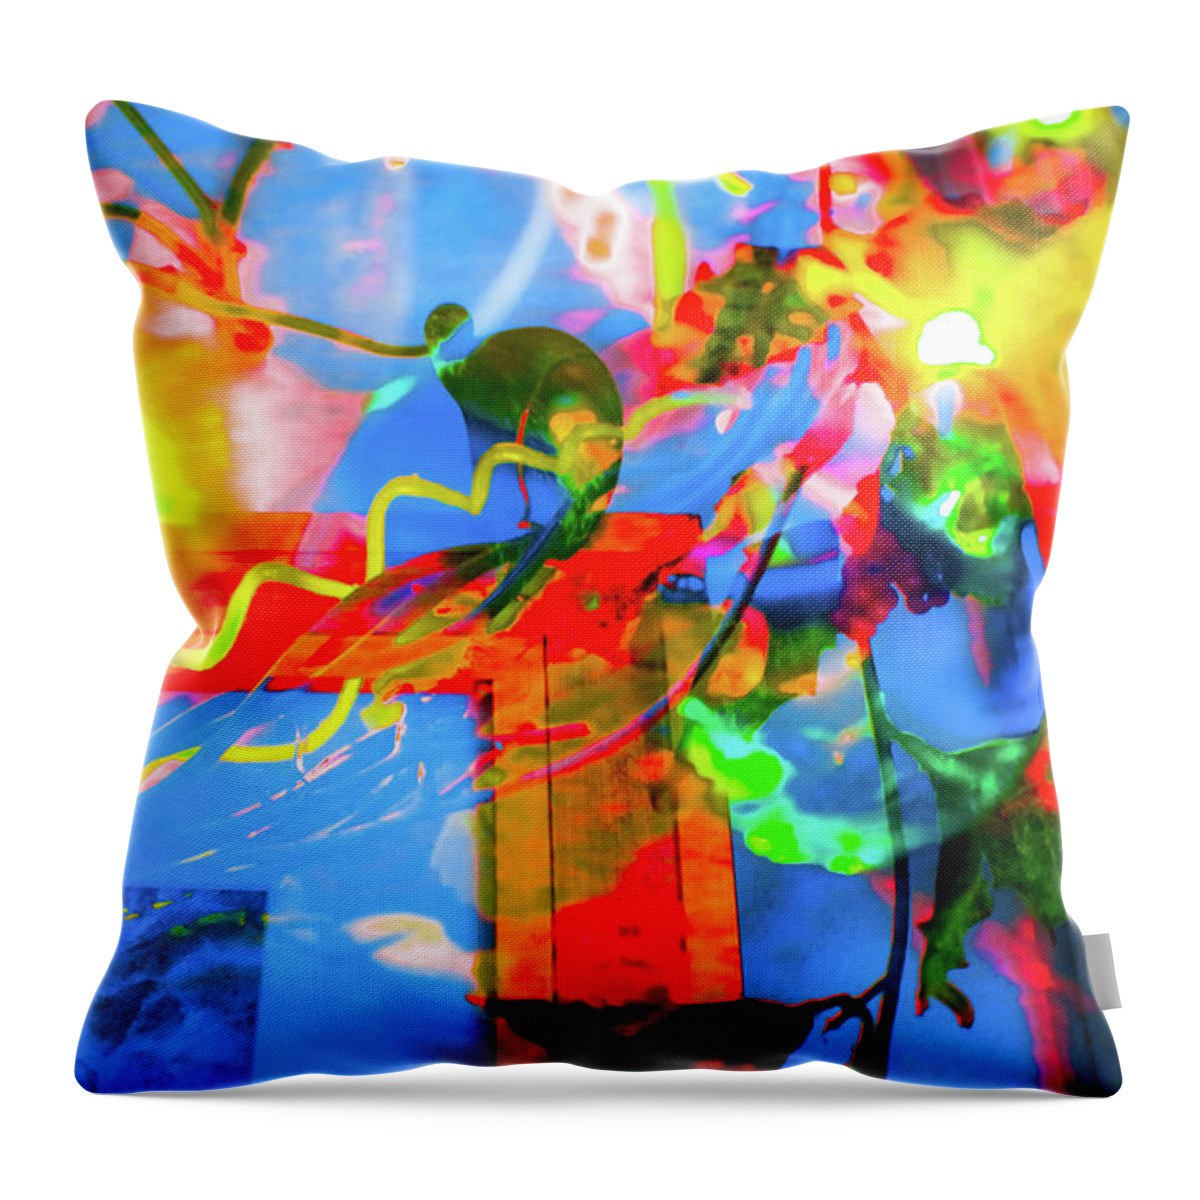 Adria Trail Throw Pillow featuring the photograph Sunny Disposition by Adria Trail